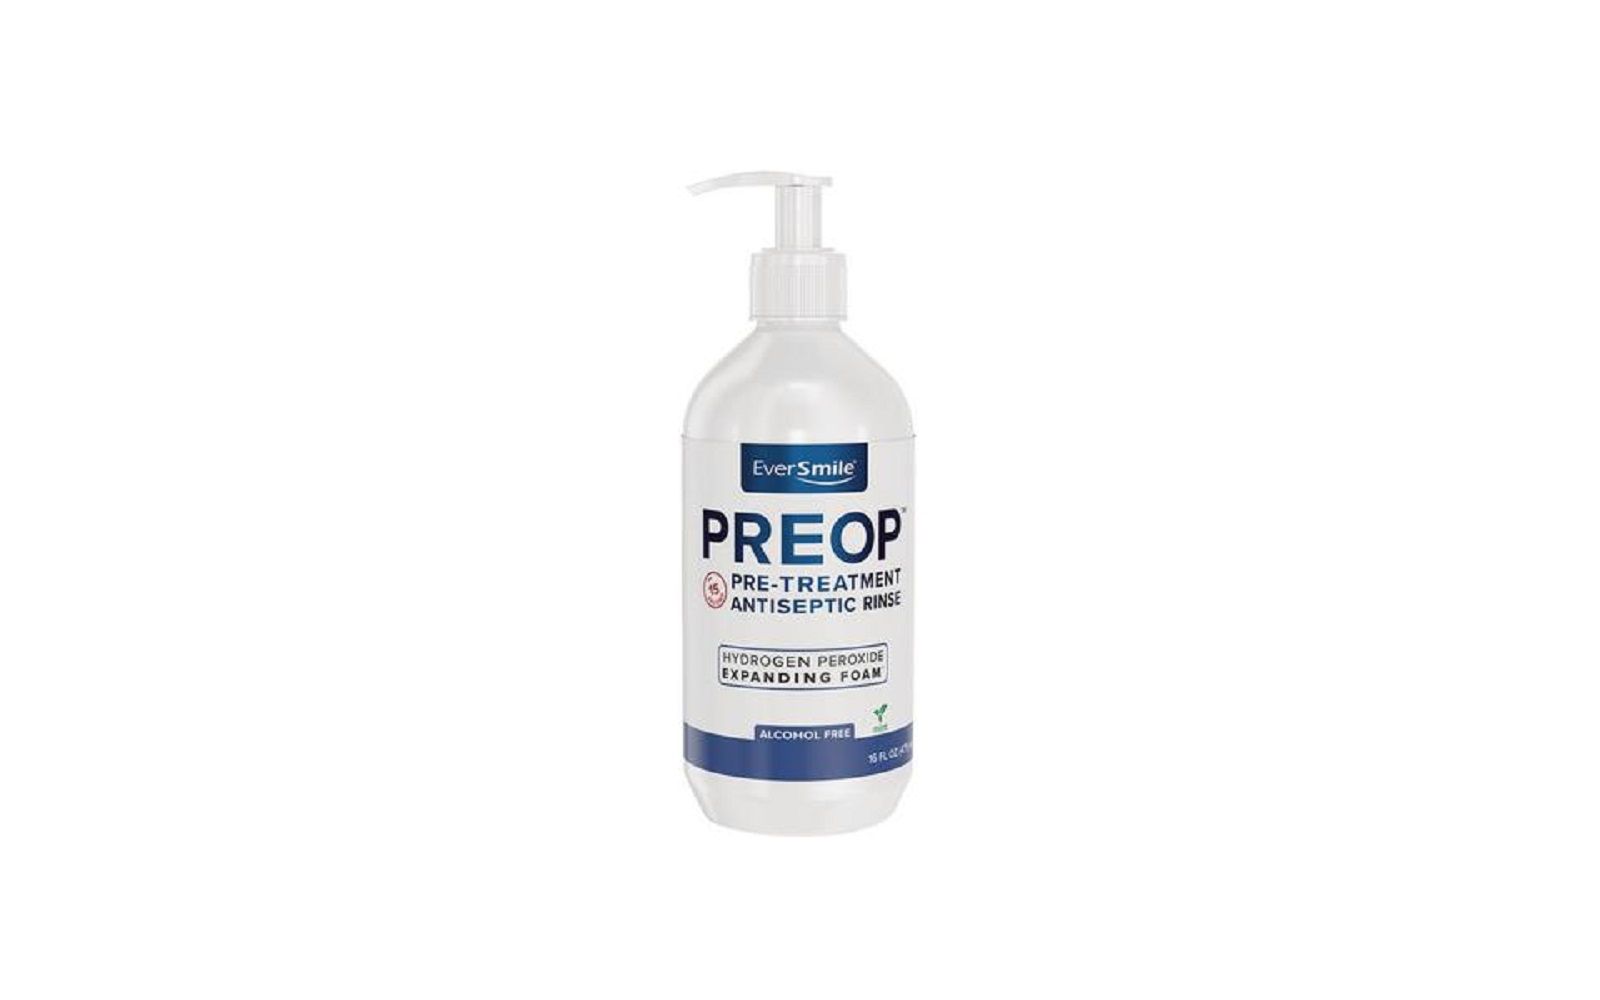 Eversmile® preop™ 3. 8% hydrogen peroxide pretreatment rinse – 100 doses, 16 oz bottle - everbrands inc